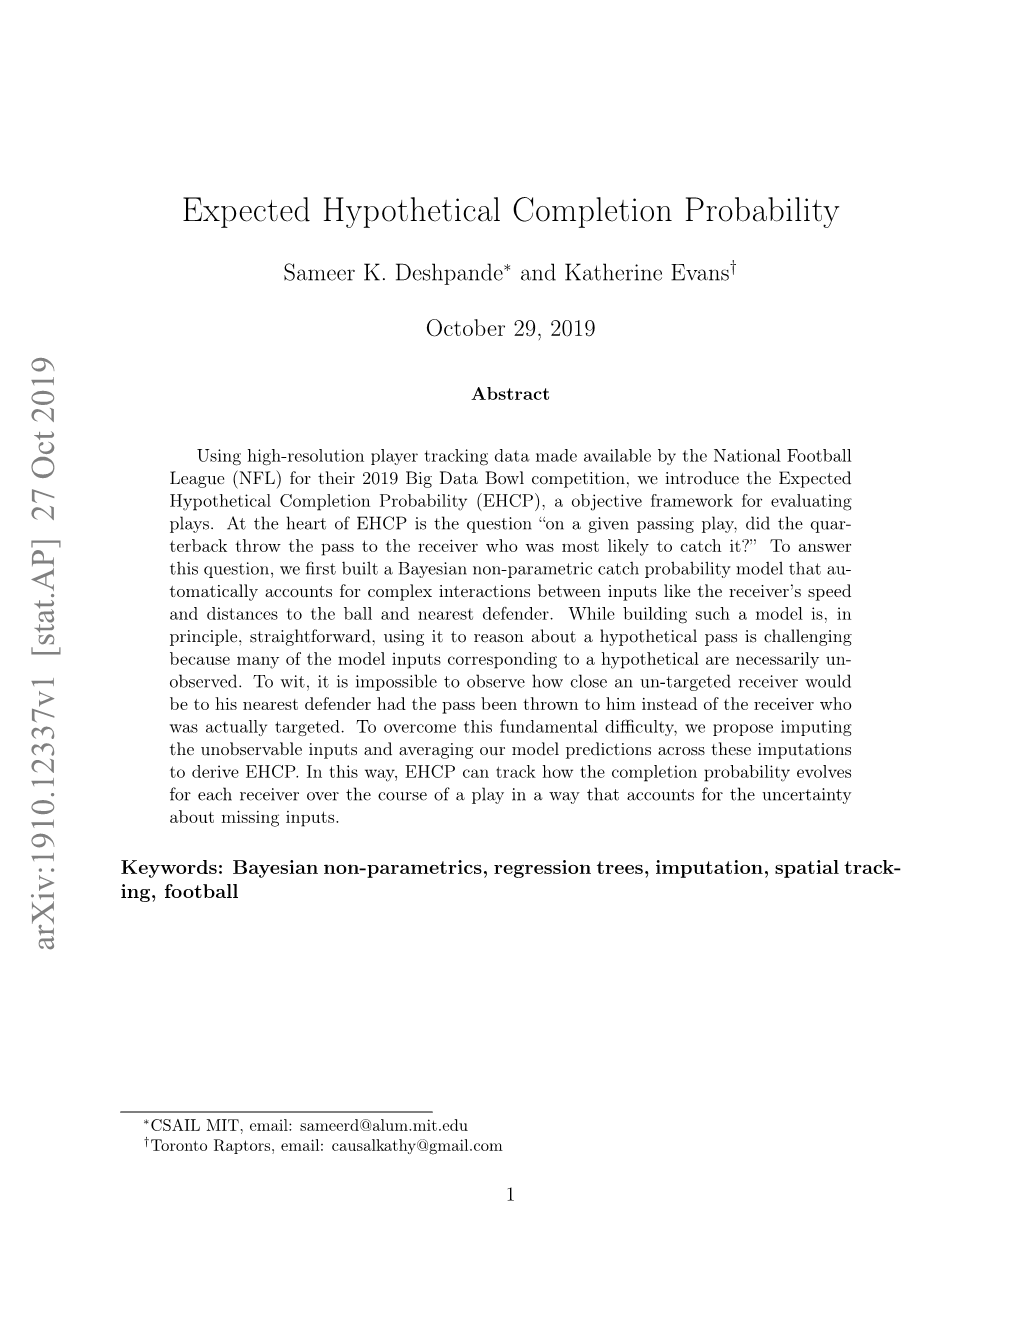 Expected Hypothetical Completion Probability Arxiv:1910.12337V1